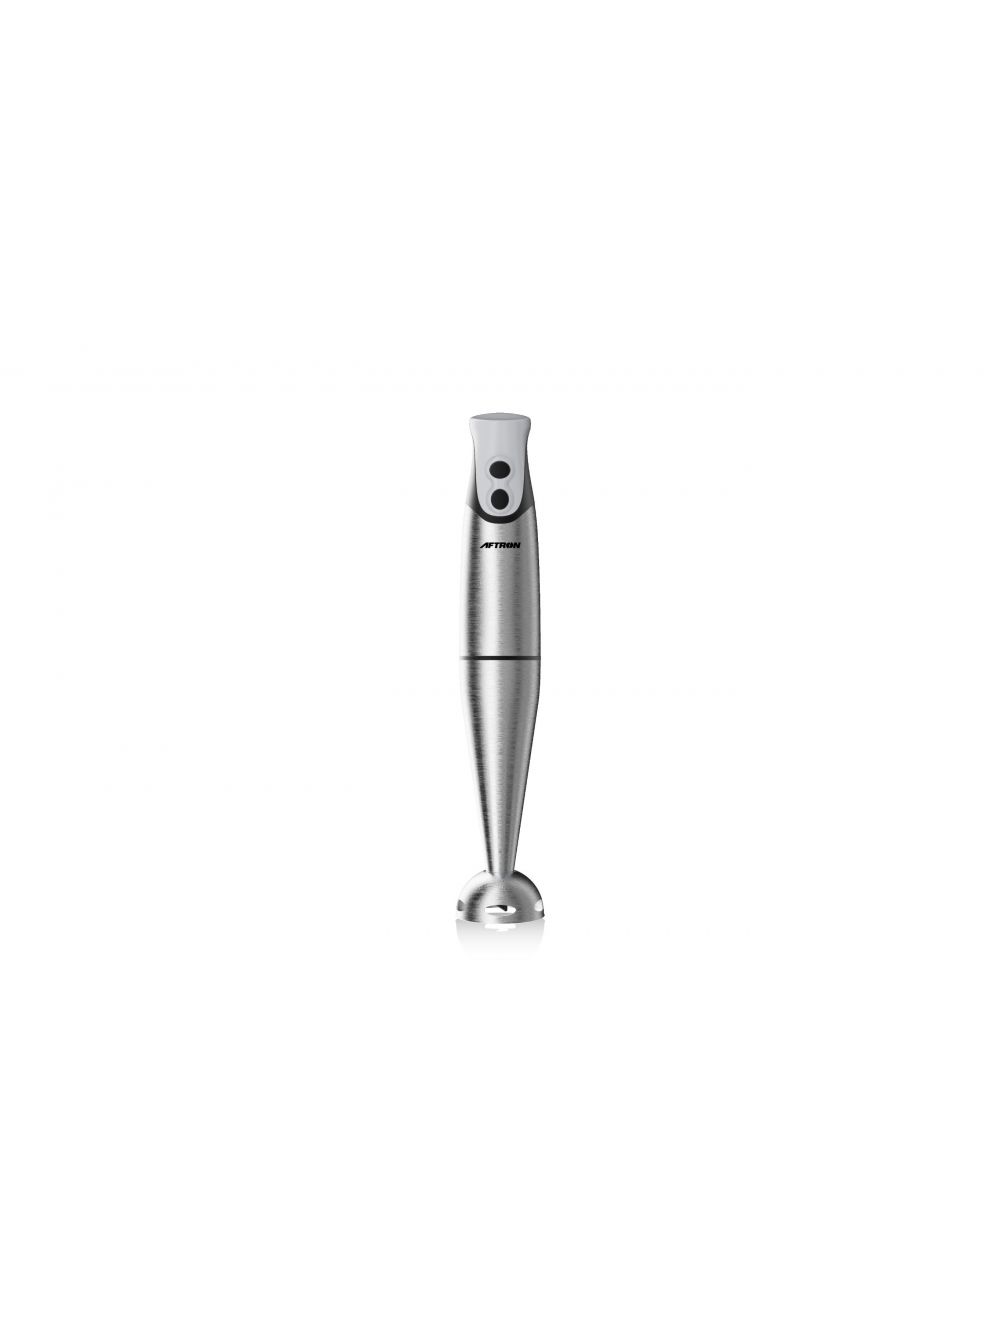 Aftron Hand Blender with Beaker and Chopper 300 Watts, Silver-AFHB9305S